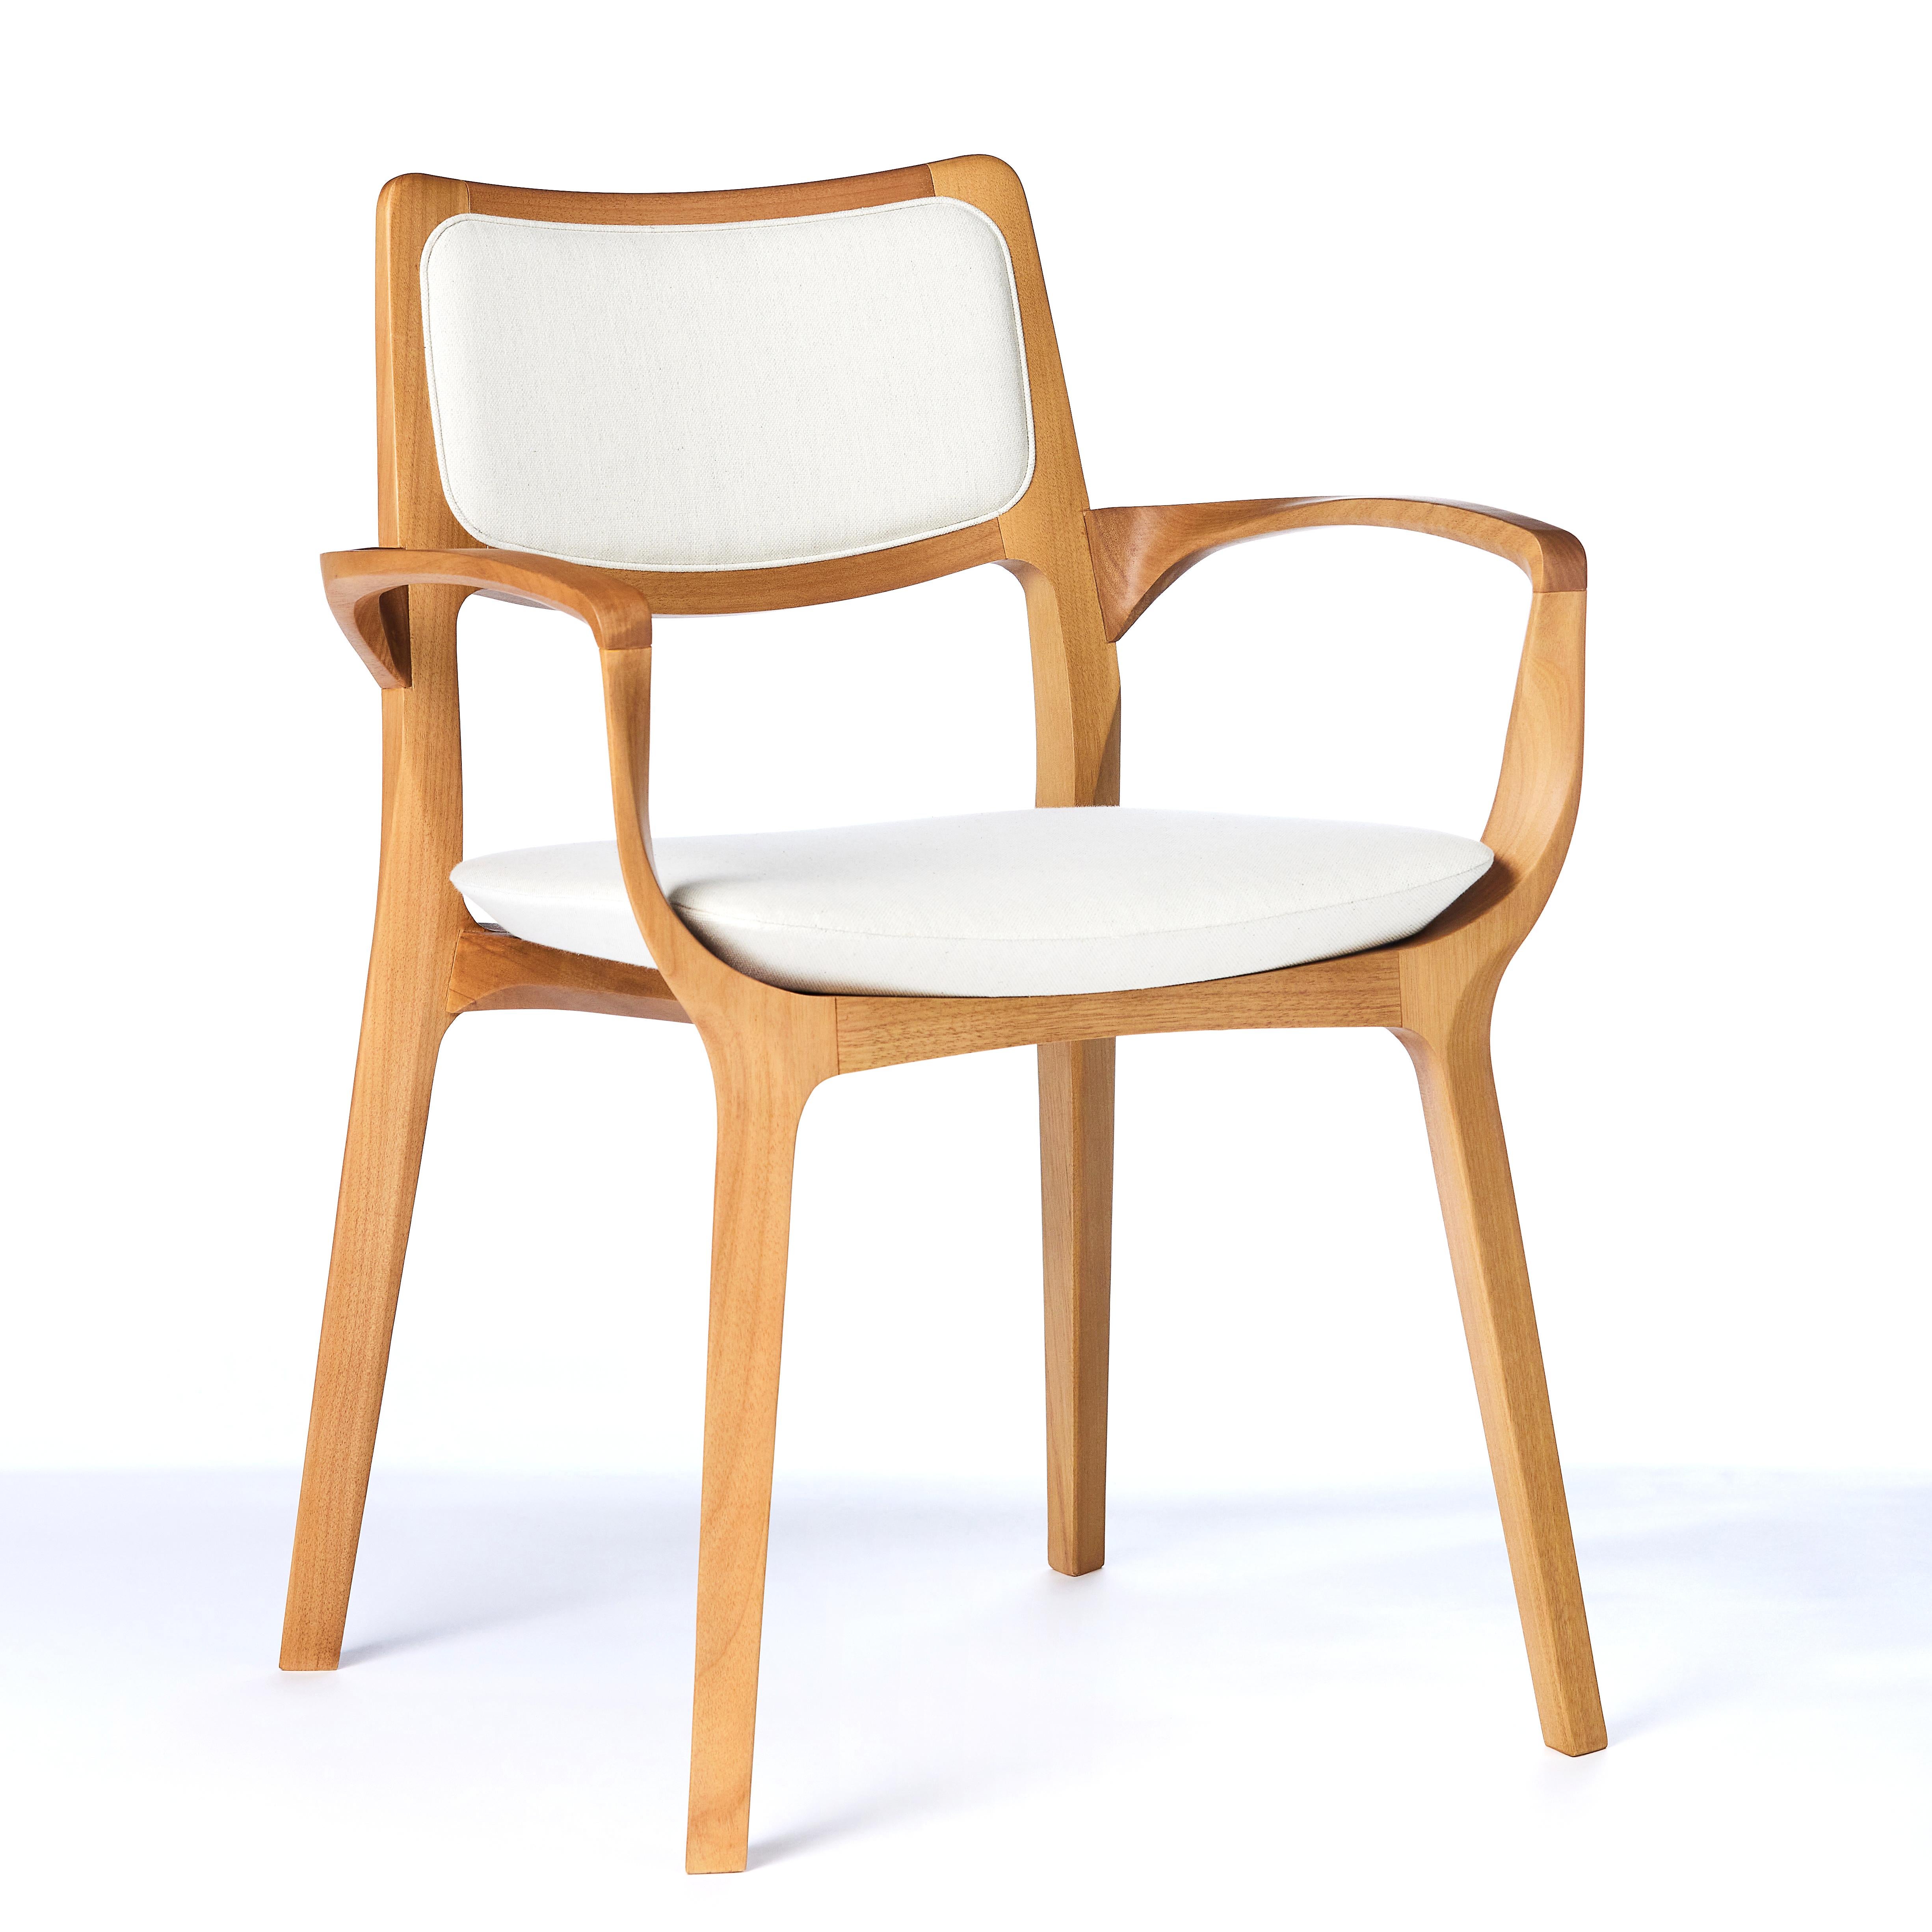 The Moderns Aurora Chair Sculptured in Walnut Finish Arms, leather seating, cane en vente 3